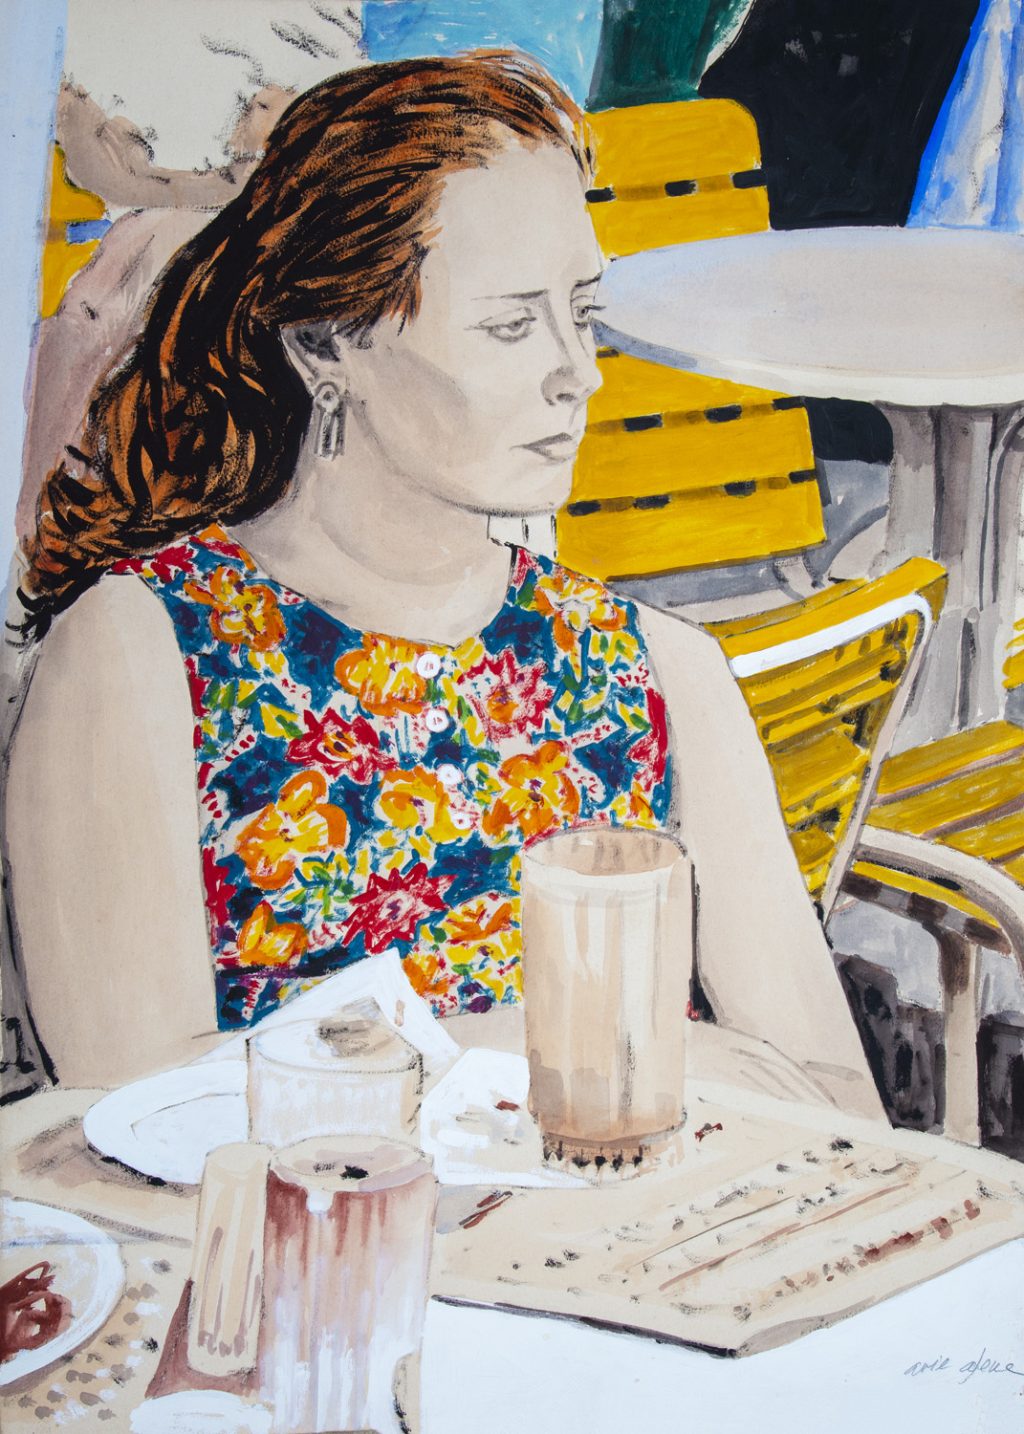 Art time gallery Jerusalem(Art online) -  Arie Azene - My Cafe - Original Acrylic on Paper - 76X57 cm / 30.5X23 inches